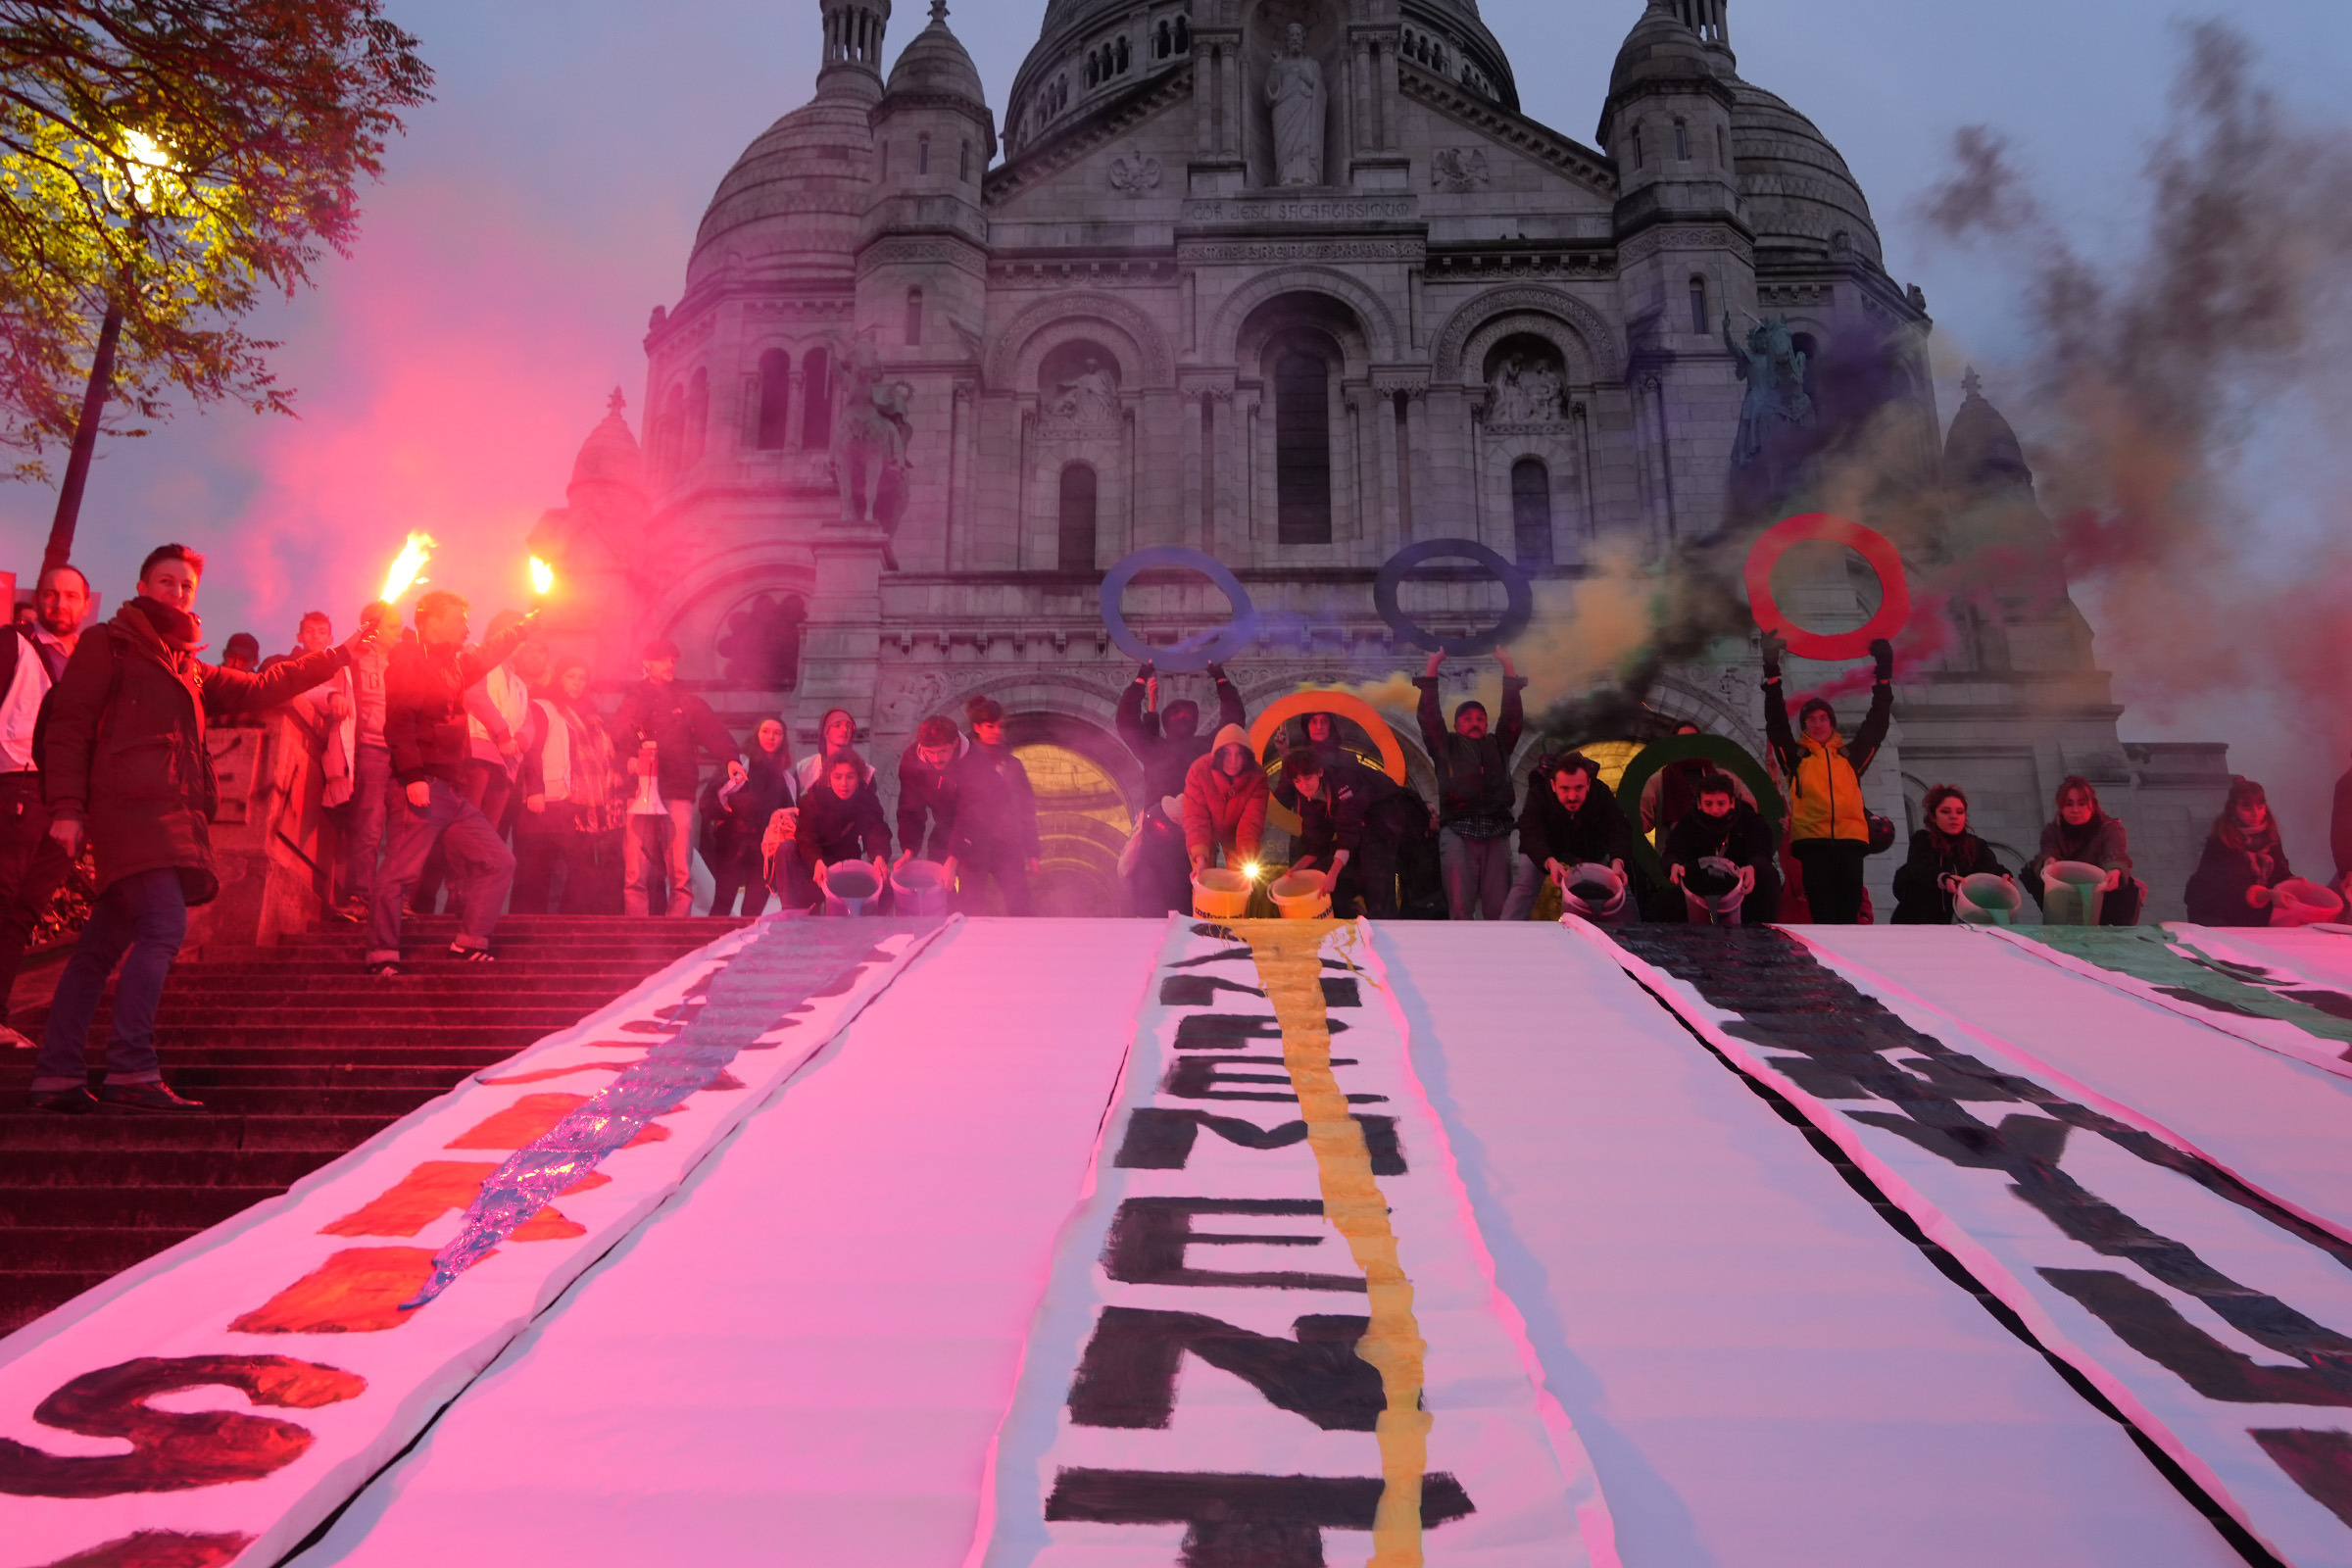 People protesting at Sacré-Cœur church in Paris, holding rings, flares, and pouring paint.